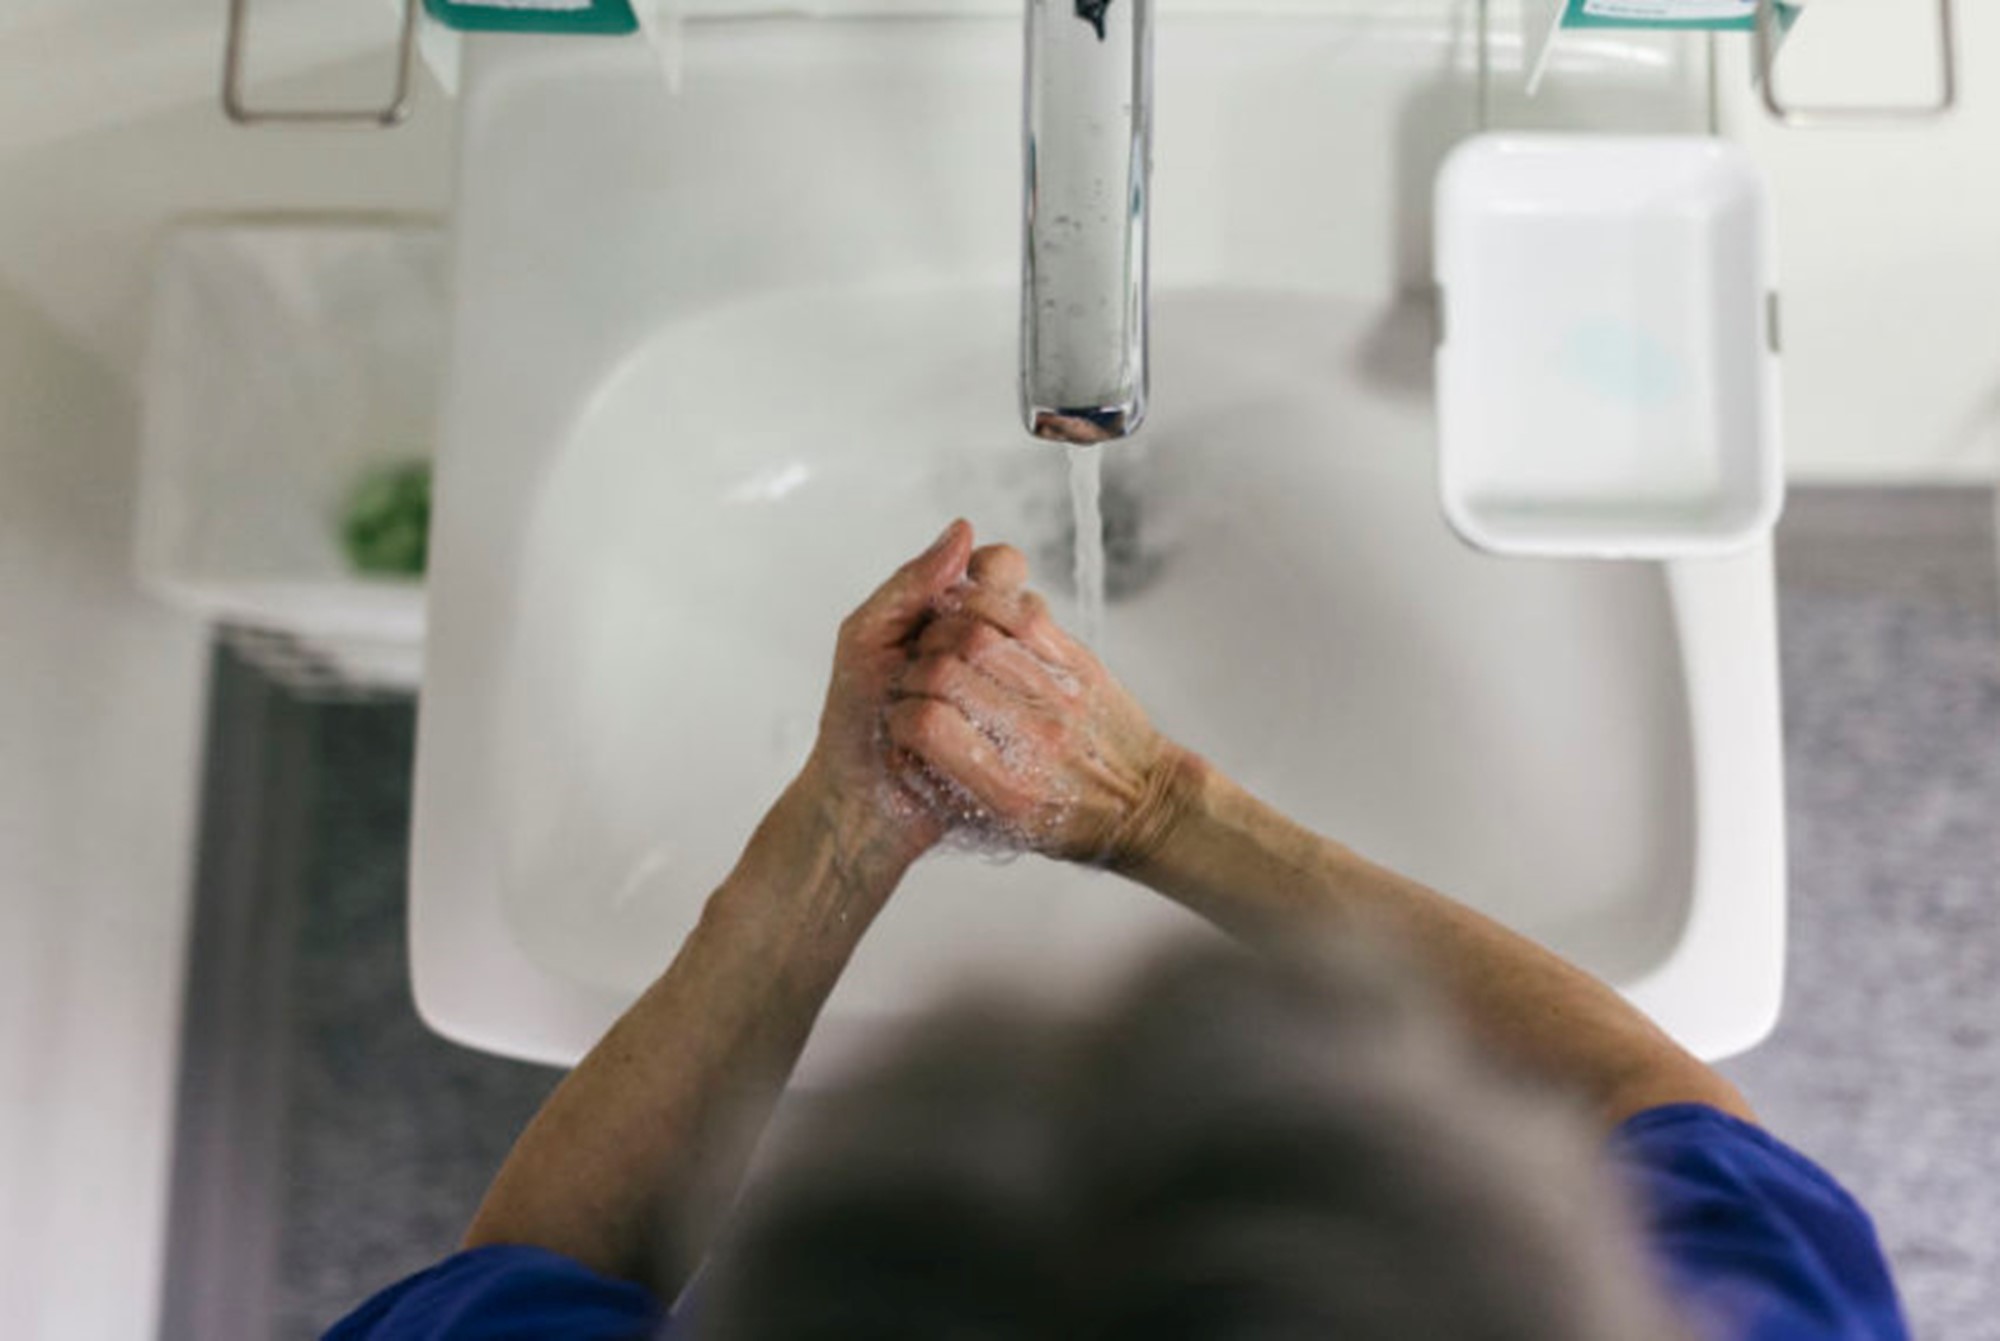 Healthcare trust, hospital water system and legionella prevention programmes